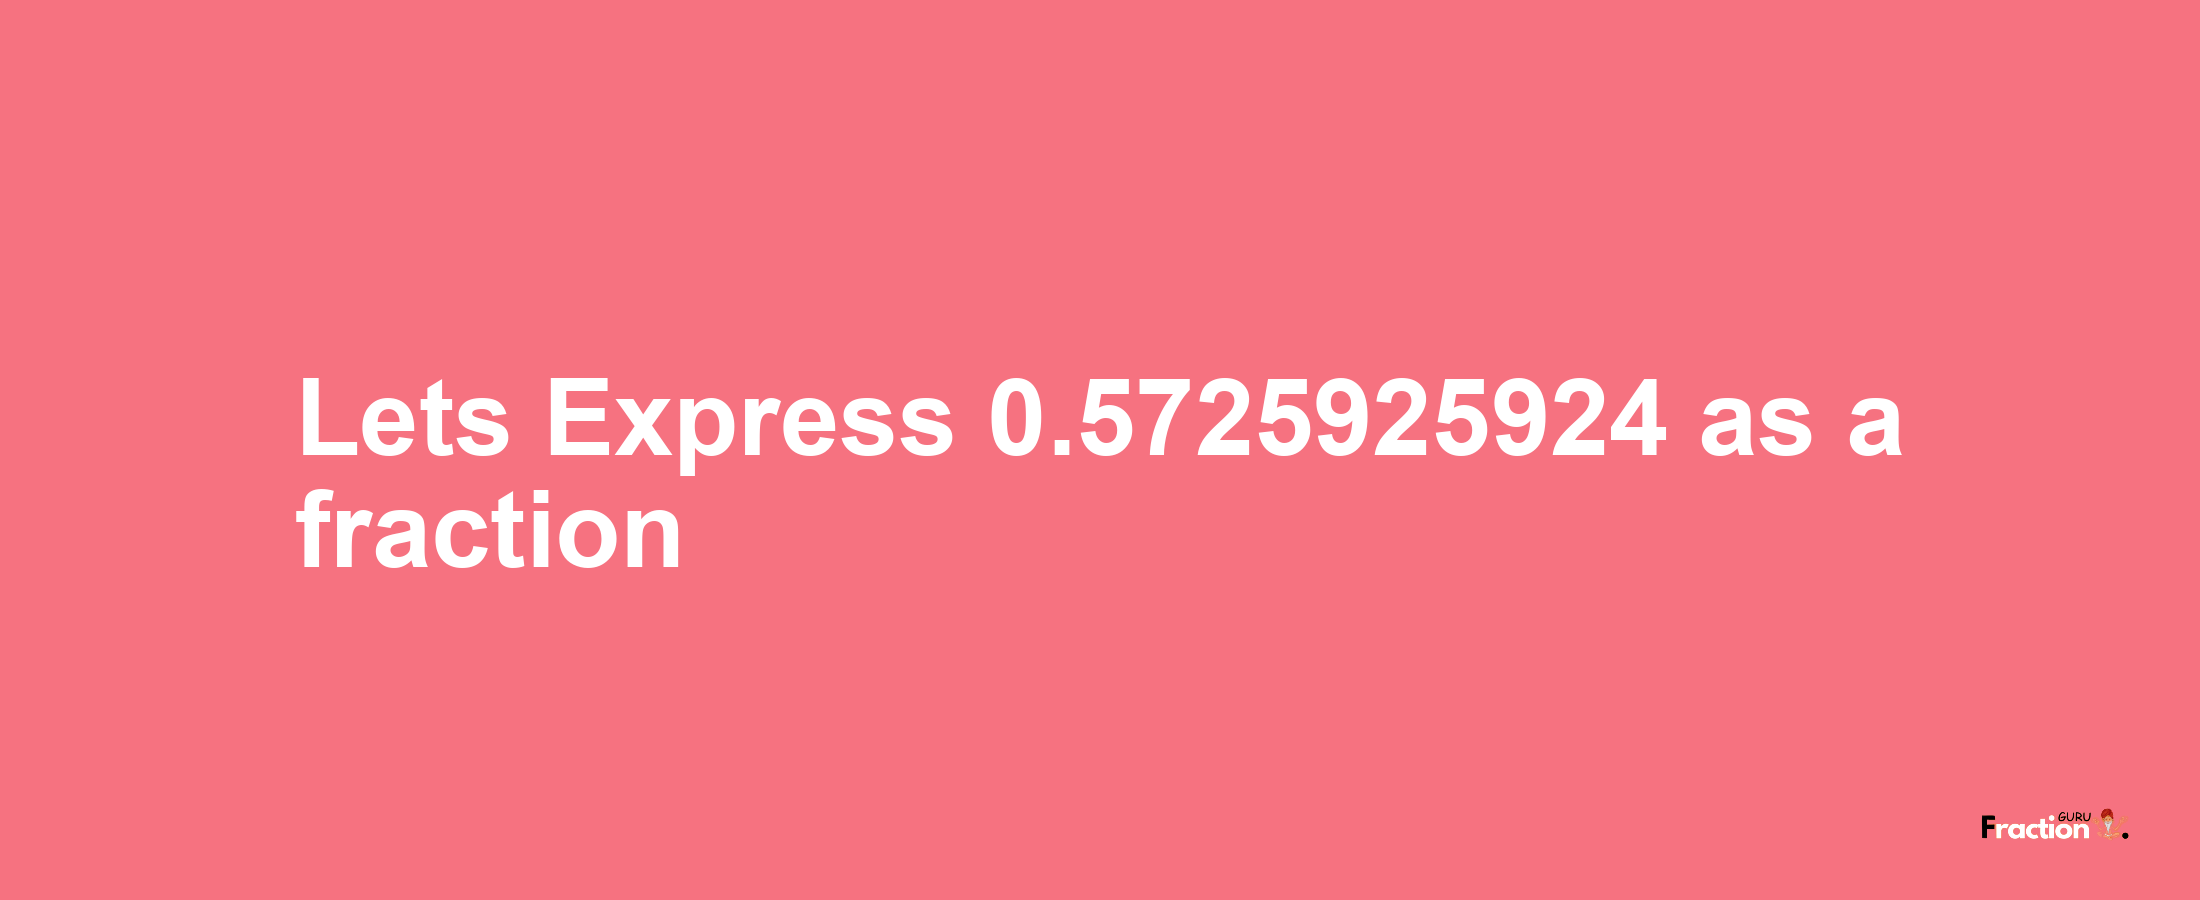 Lets Express 0.5725925924 as afraction